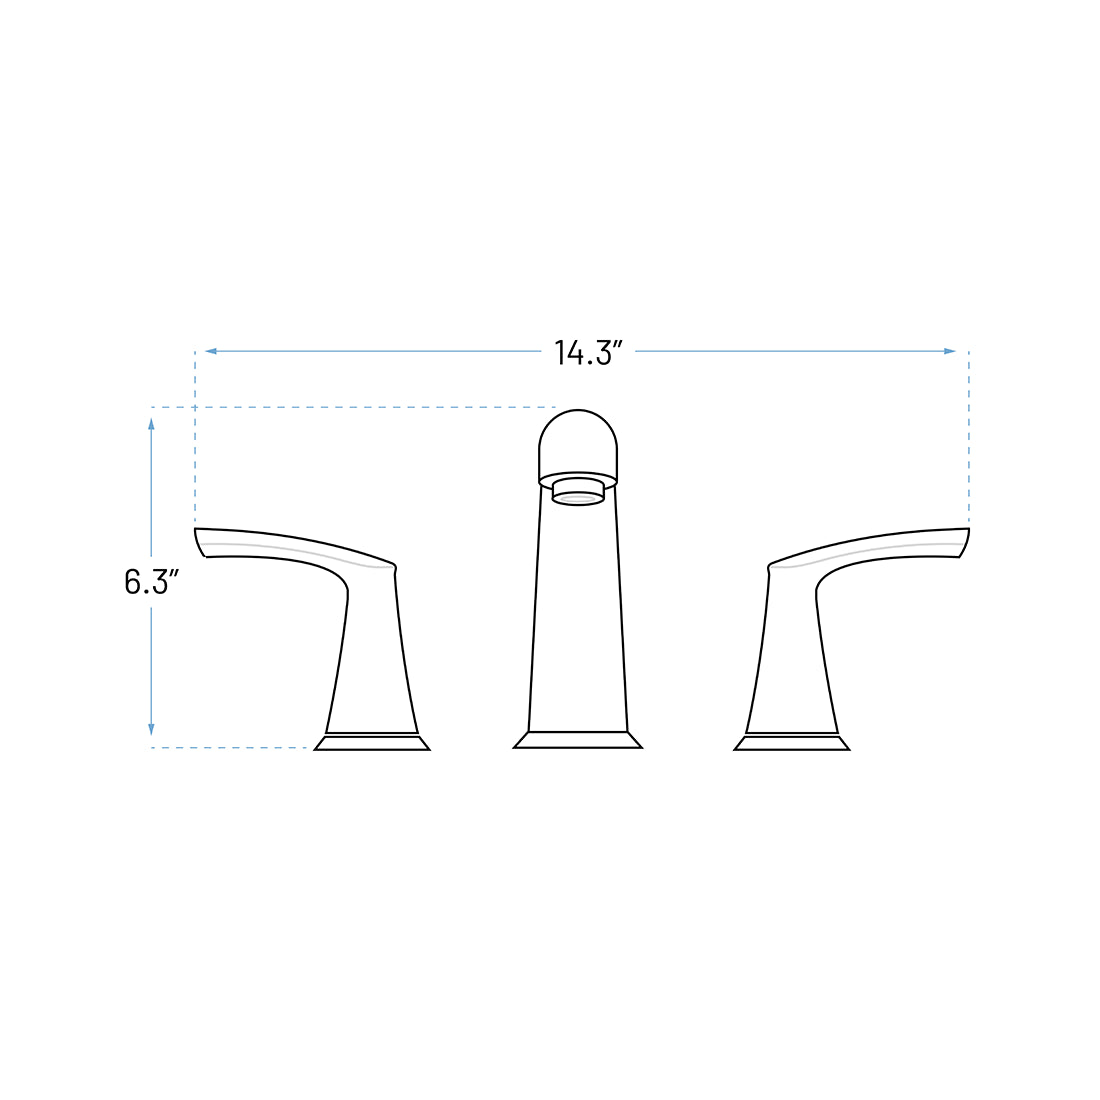 Technical Drawing of a Bathroom Faucet